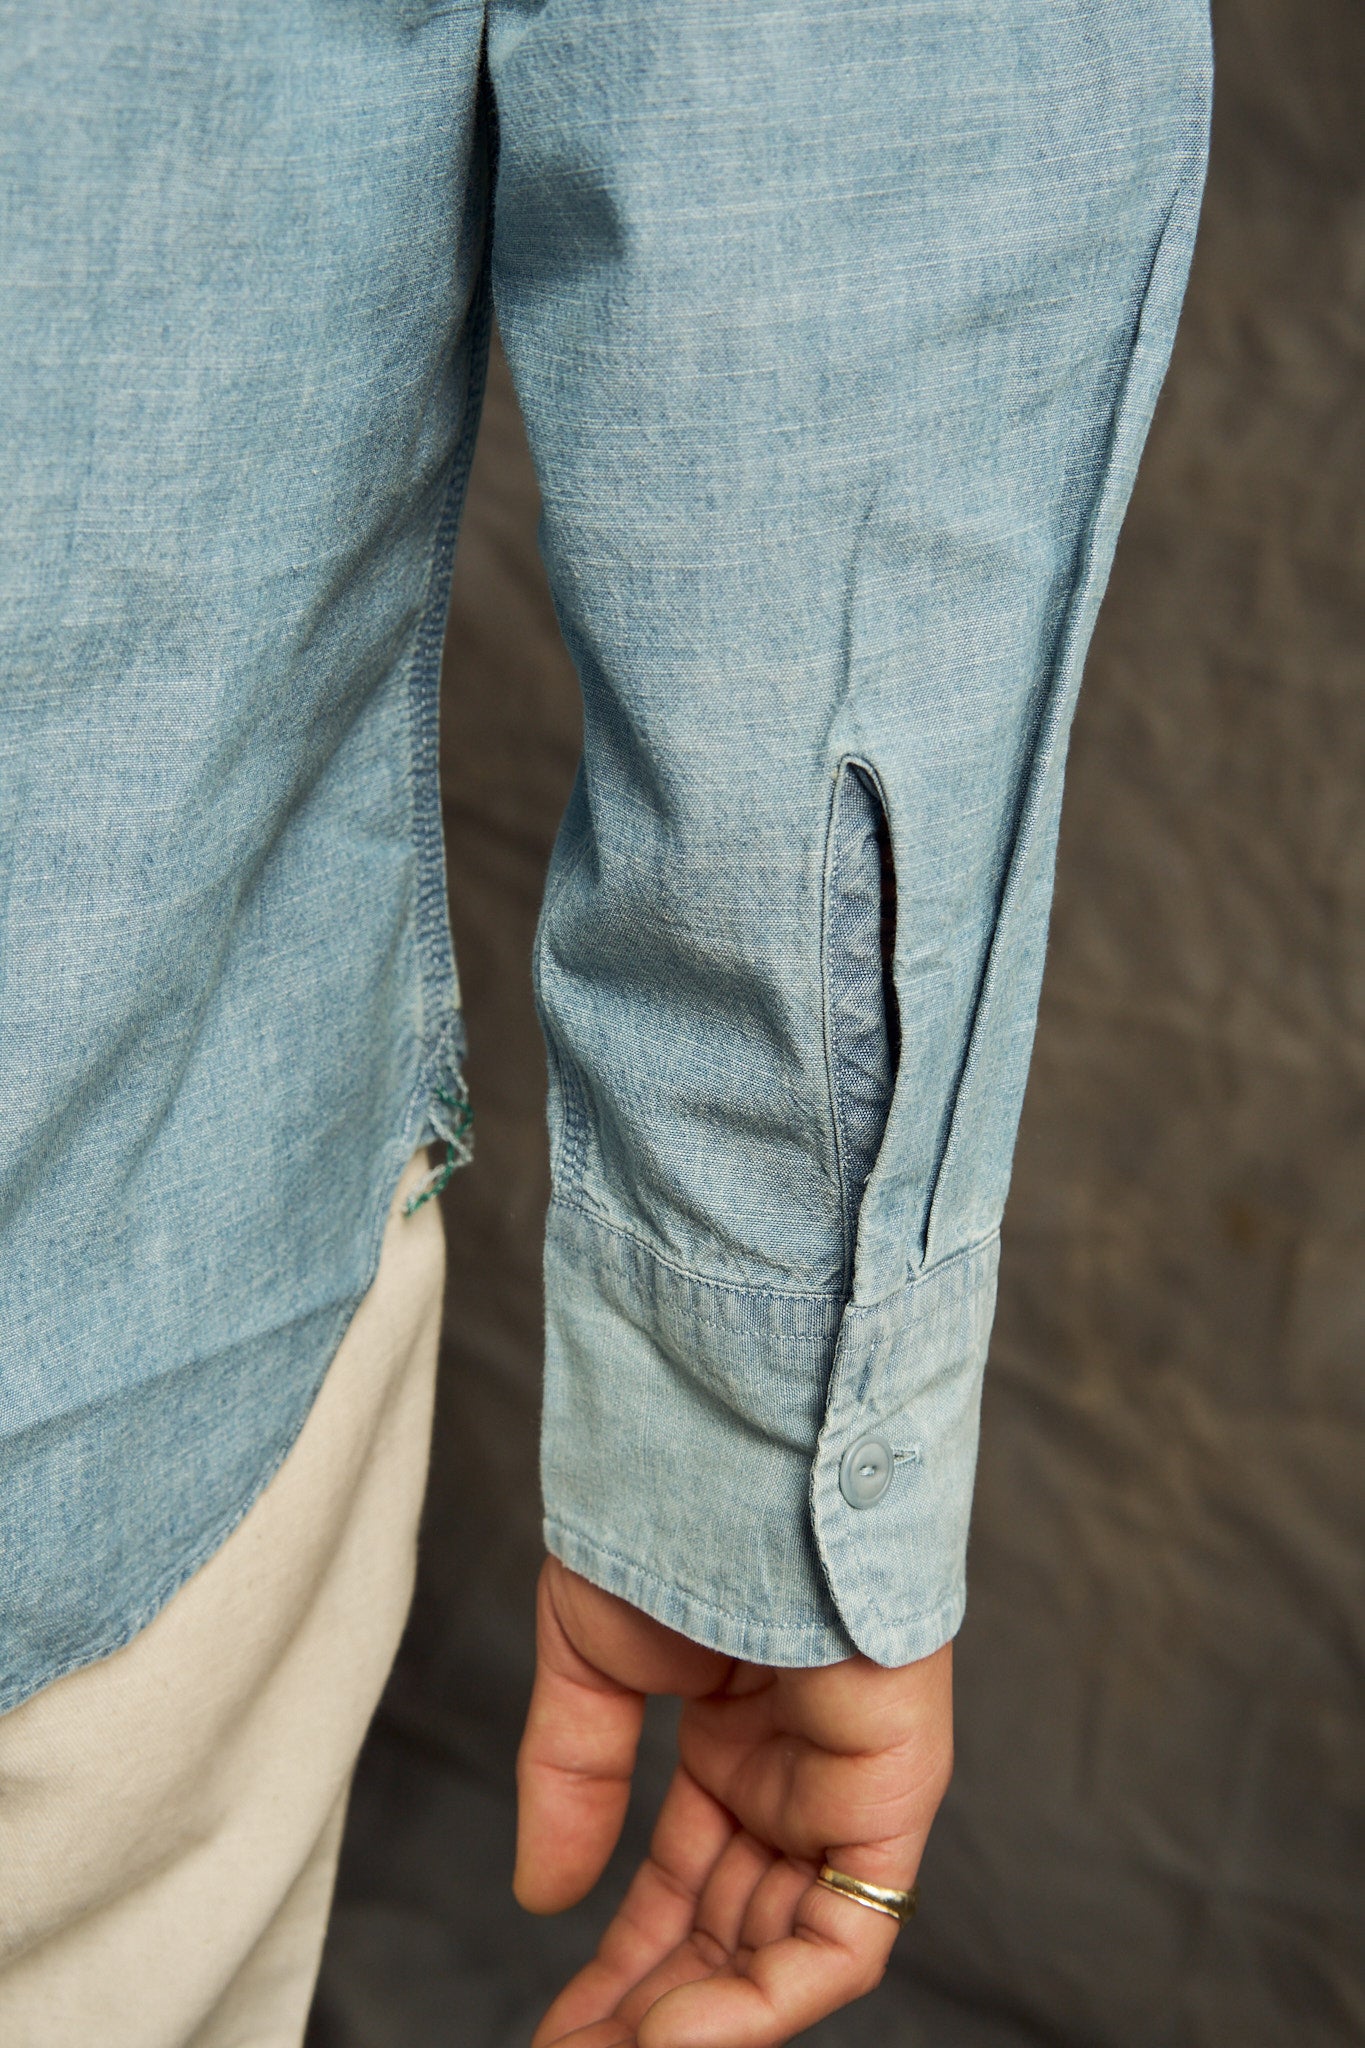 Chambray Workshirt - Distressed and Sunfaded Indigo